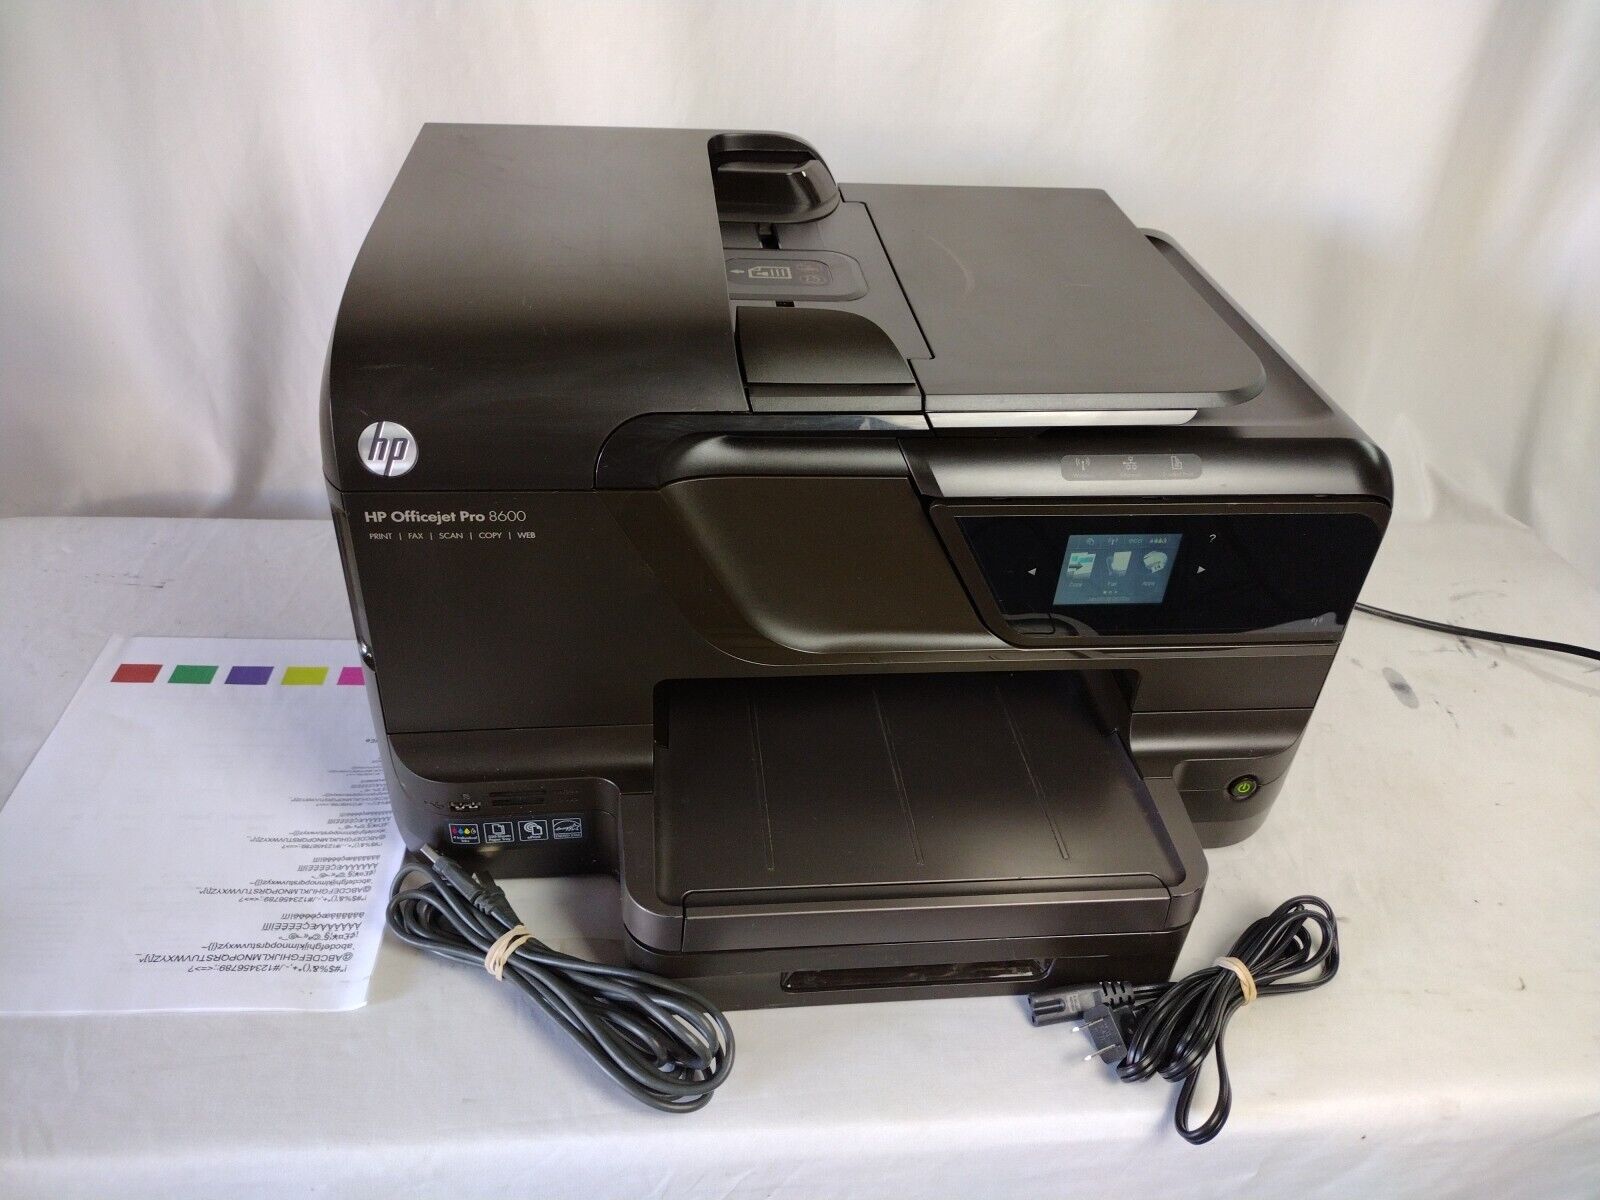 HP Officejet Pro 8600 Printer - TESTED - LOW Page Count 877 Only.